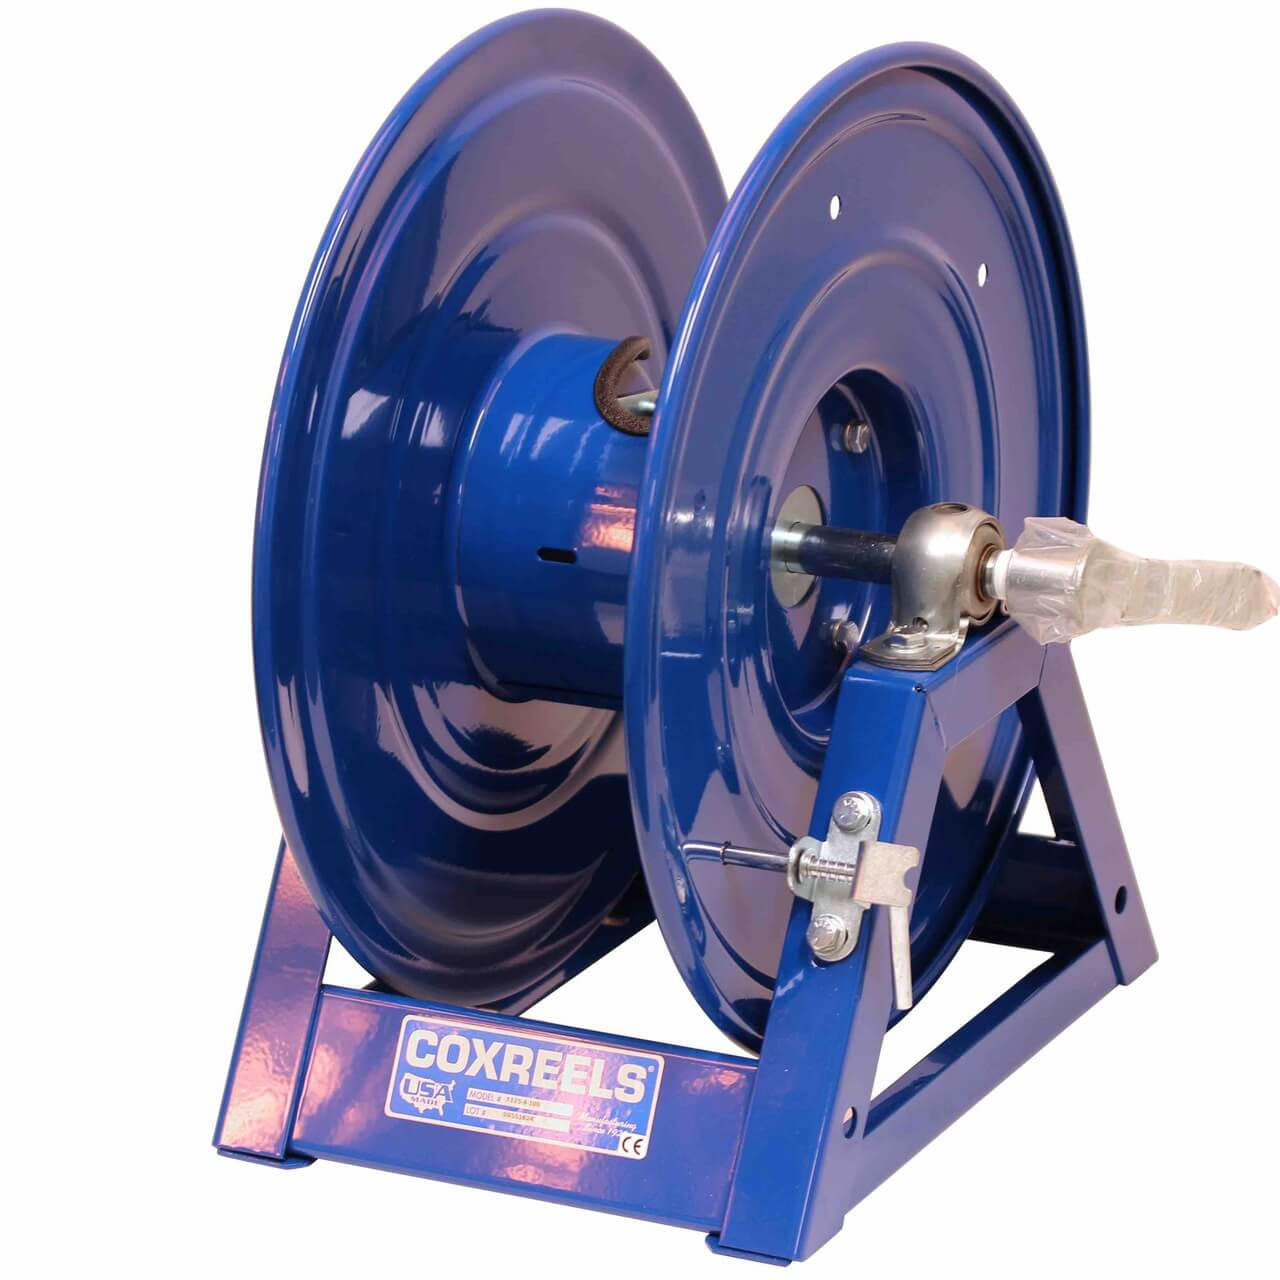 Coxreels 1125-6-100 Hose Reel — Find Quality Products at